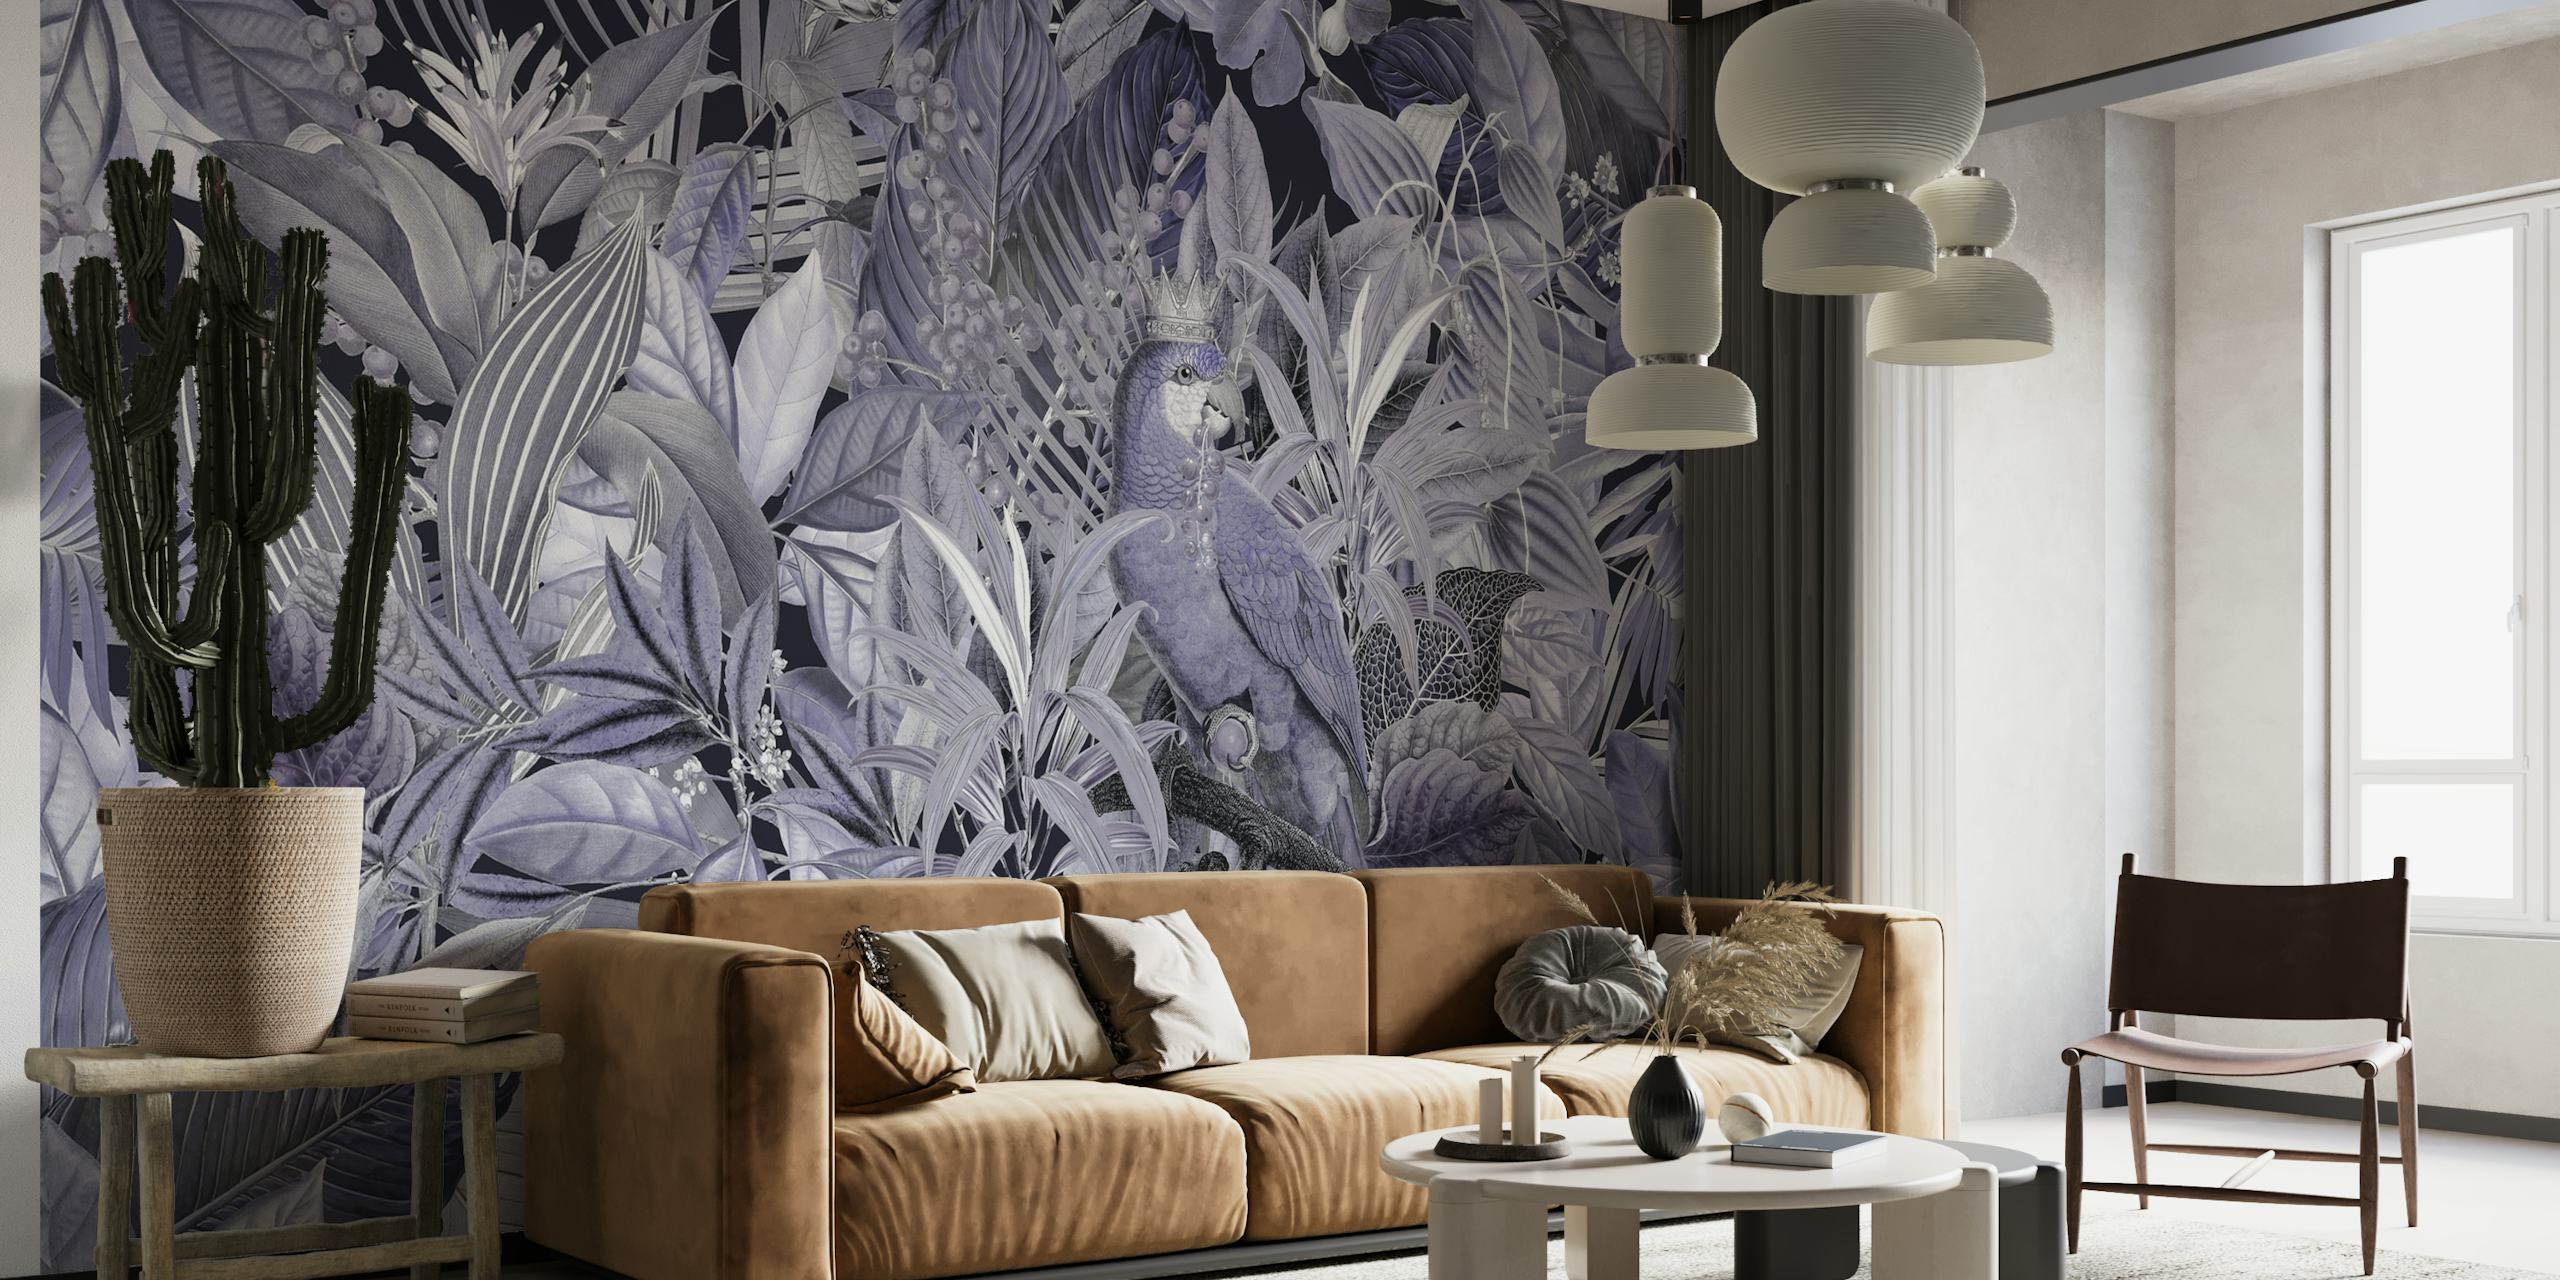 Parrot silhouette within a lavish purple and violet tropical floral pattern wall mural